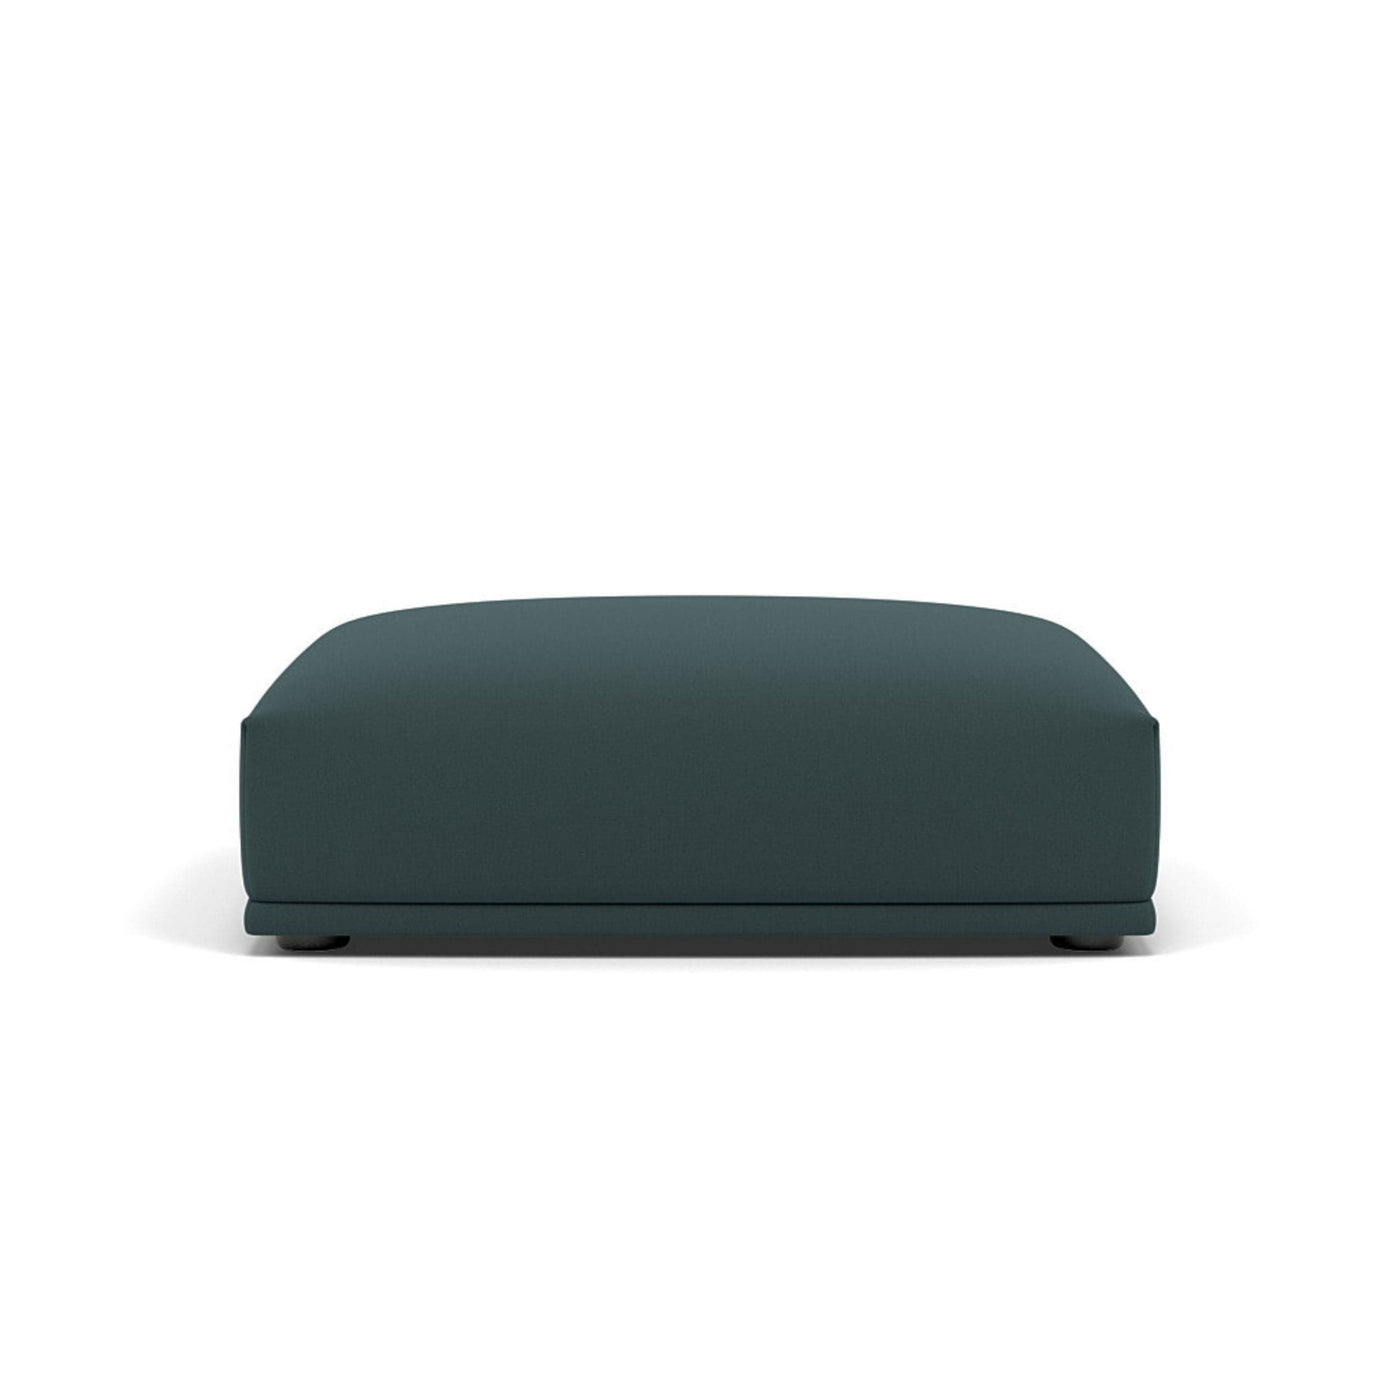 Muuto Connect Modular Sofa System, module h, long ottoman, steelcut 180 fabric. Available from someday designs. #colour_steelcut-180